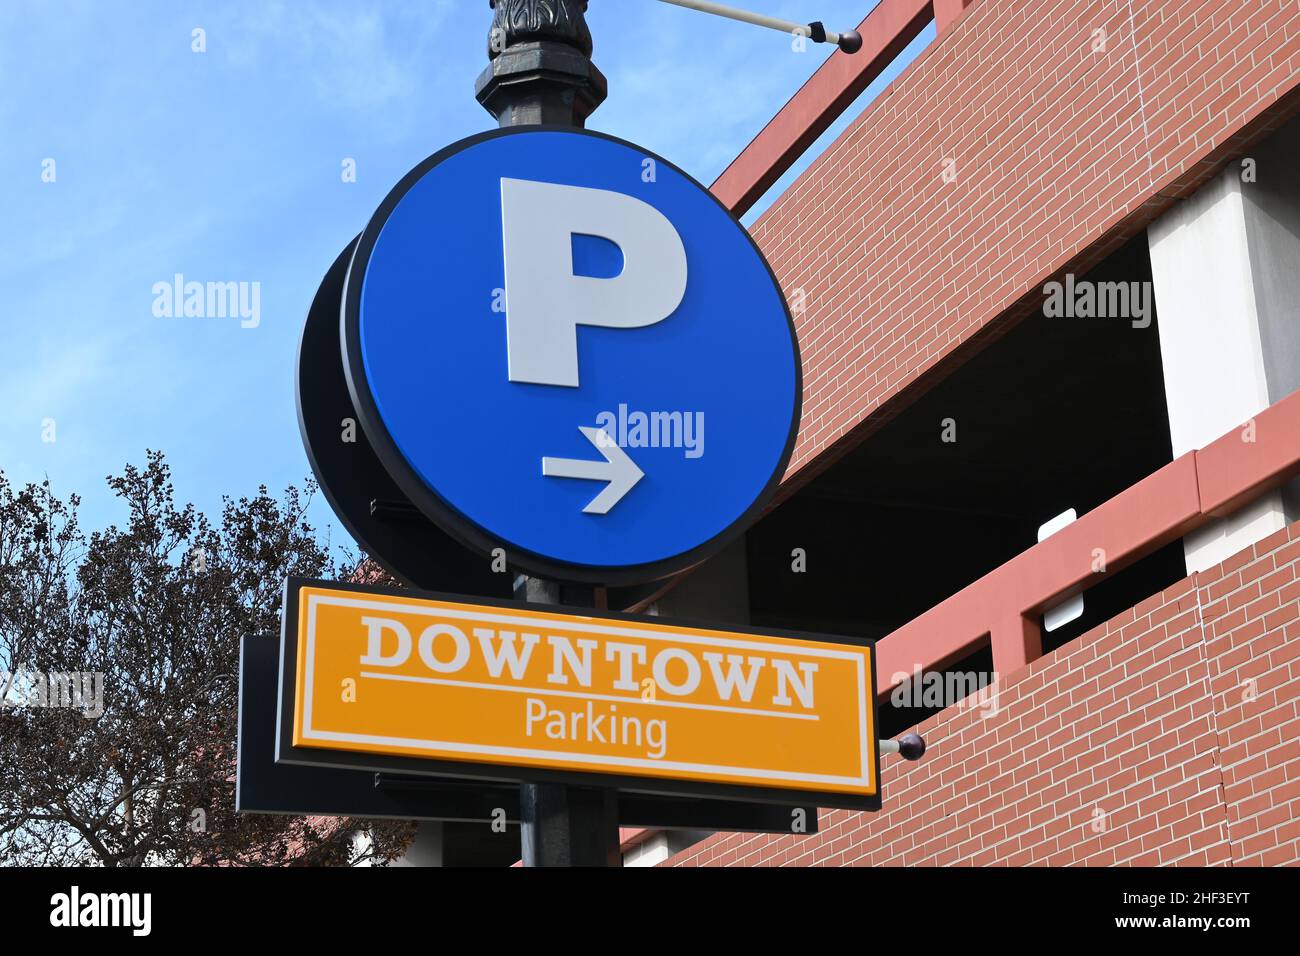 SANTA ANA, CALIFORNIA - 12 JAN 2022: Downtown Parking structure signs near the Civic Center. Stock Photo